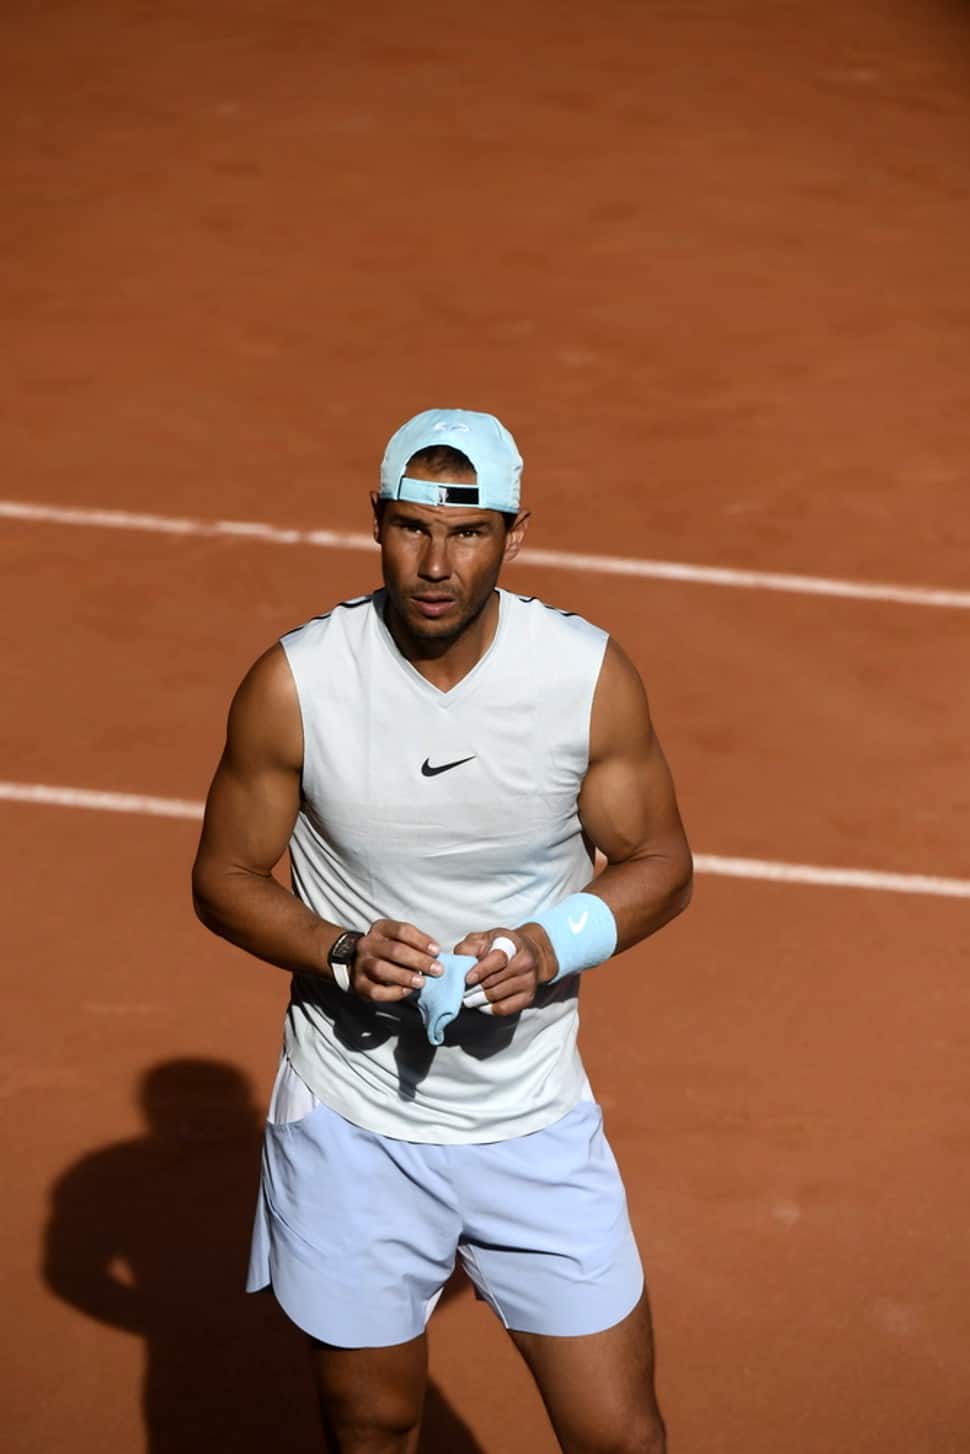 Rafa Nadal has won 107 matches at the French Open and lost just three. This includes record 13 titles (2005-08, 2010-14, 2017-20). (Source: Twitter)